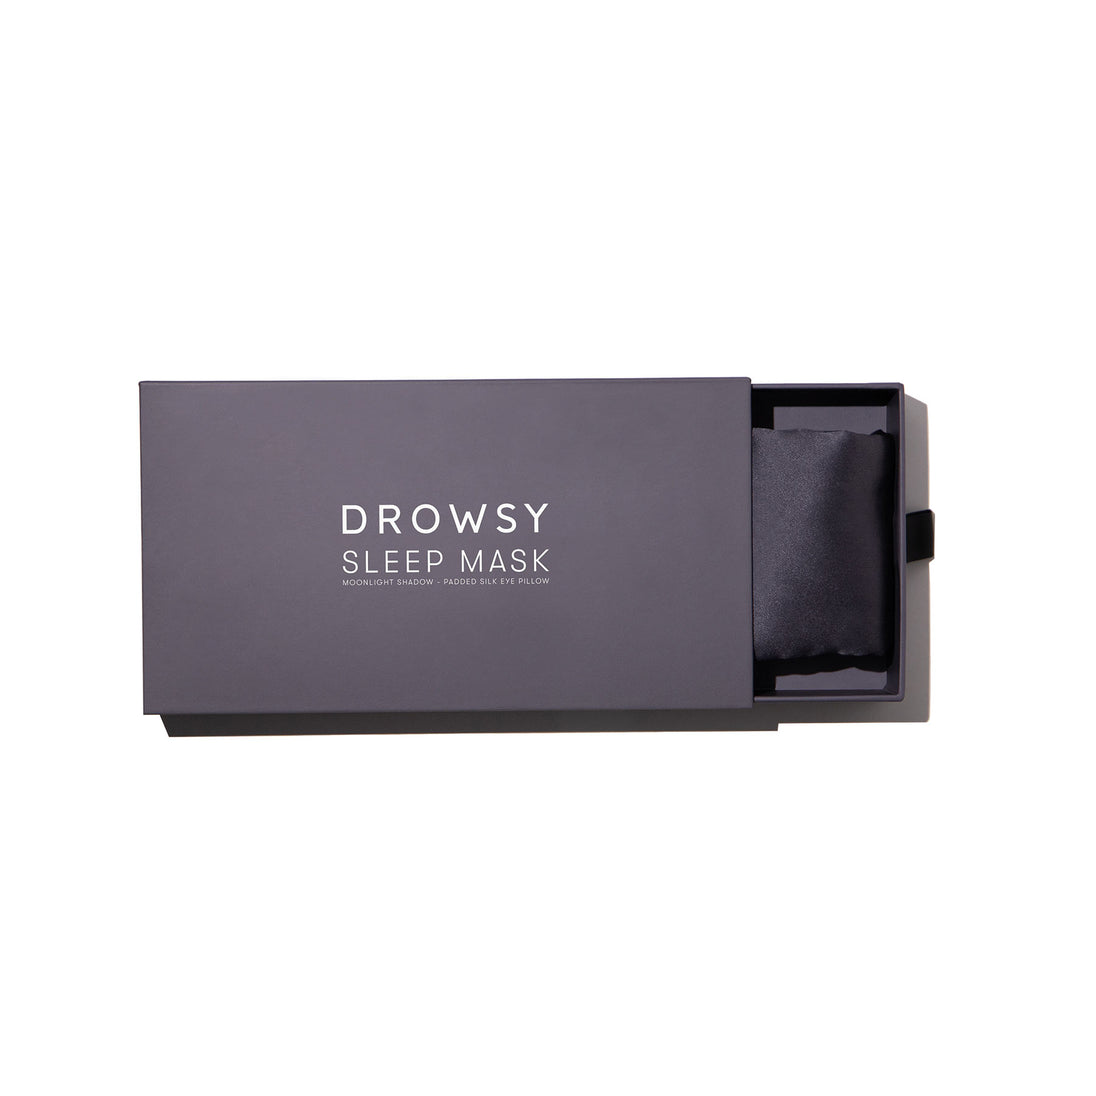 Drowsy sleep co. Moonlight Shadow sleep mask in a Grey drawer box on white background